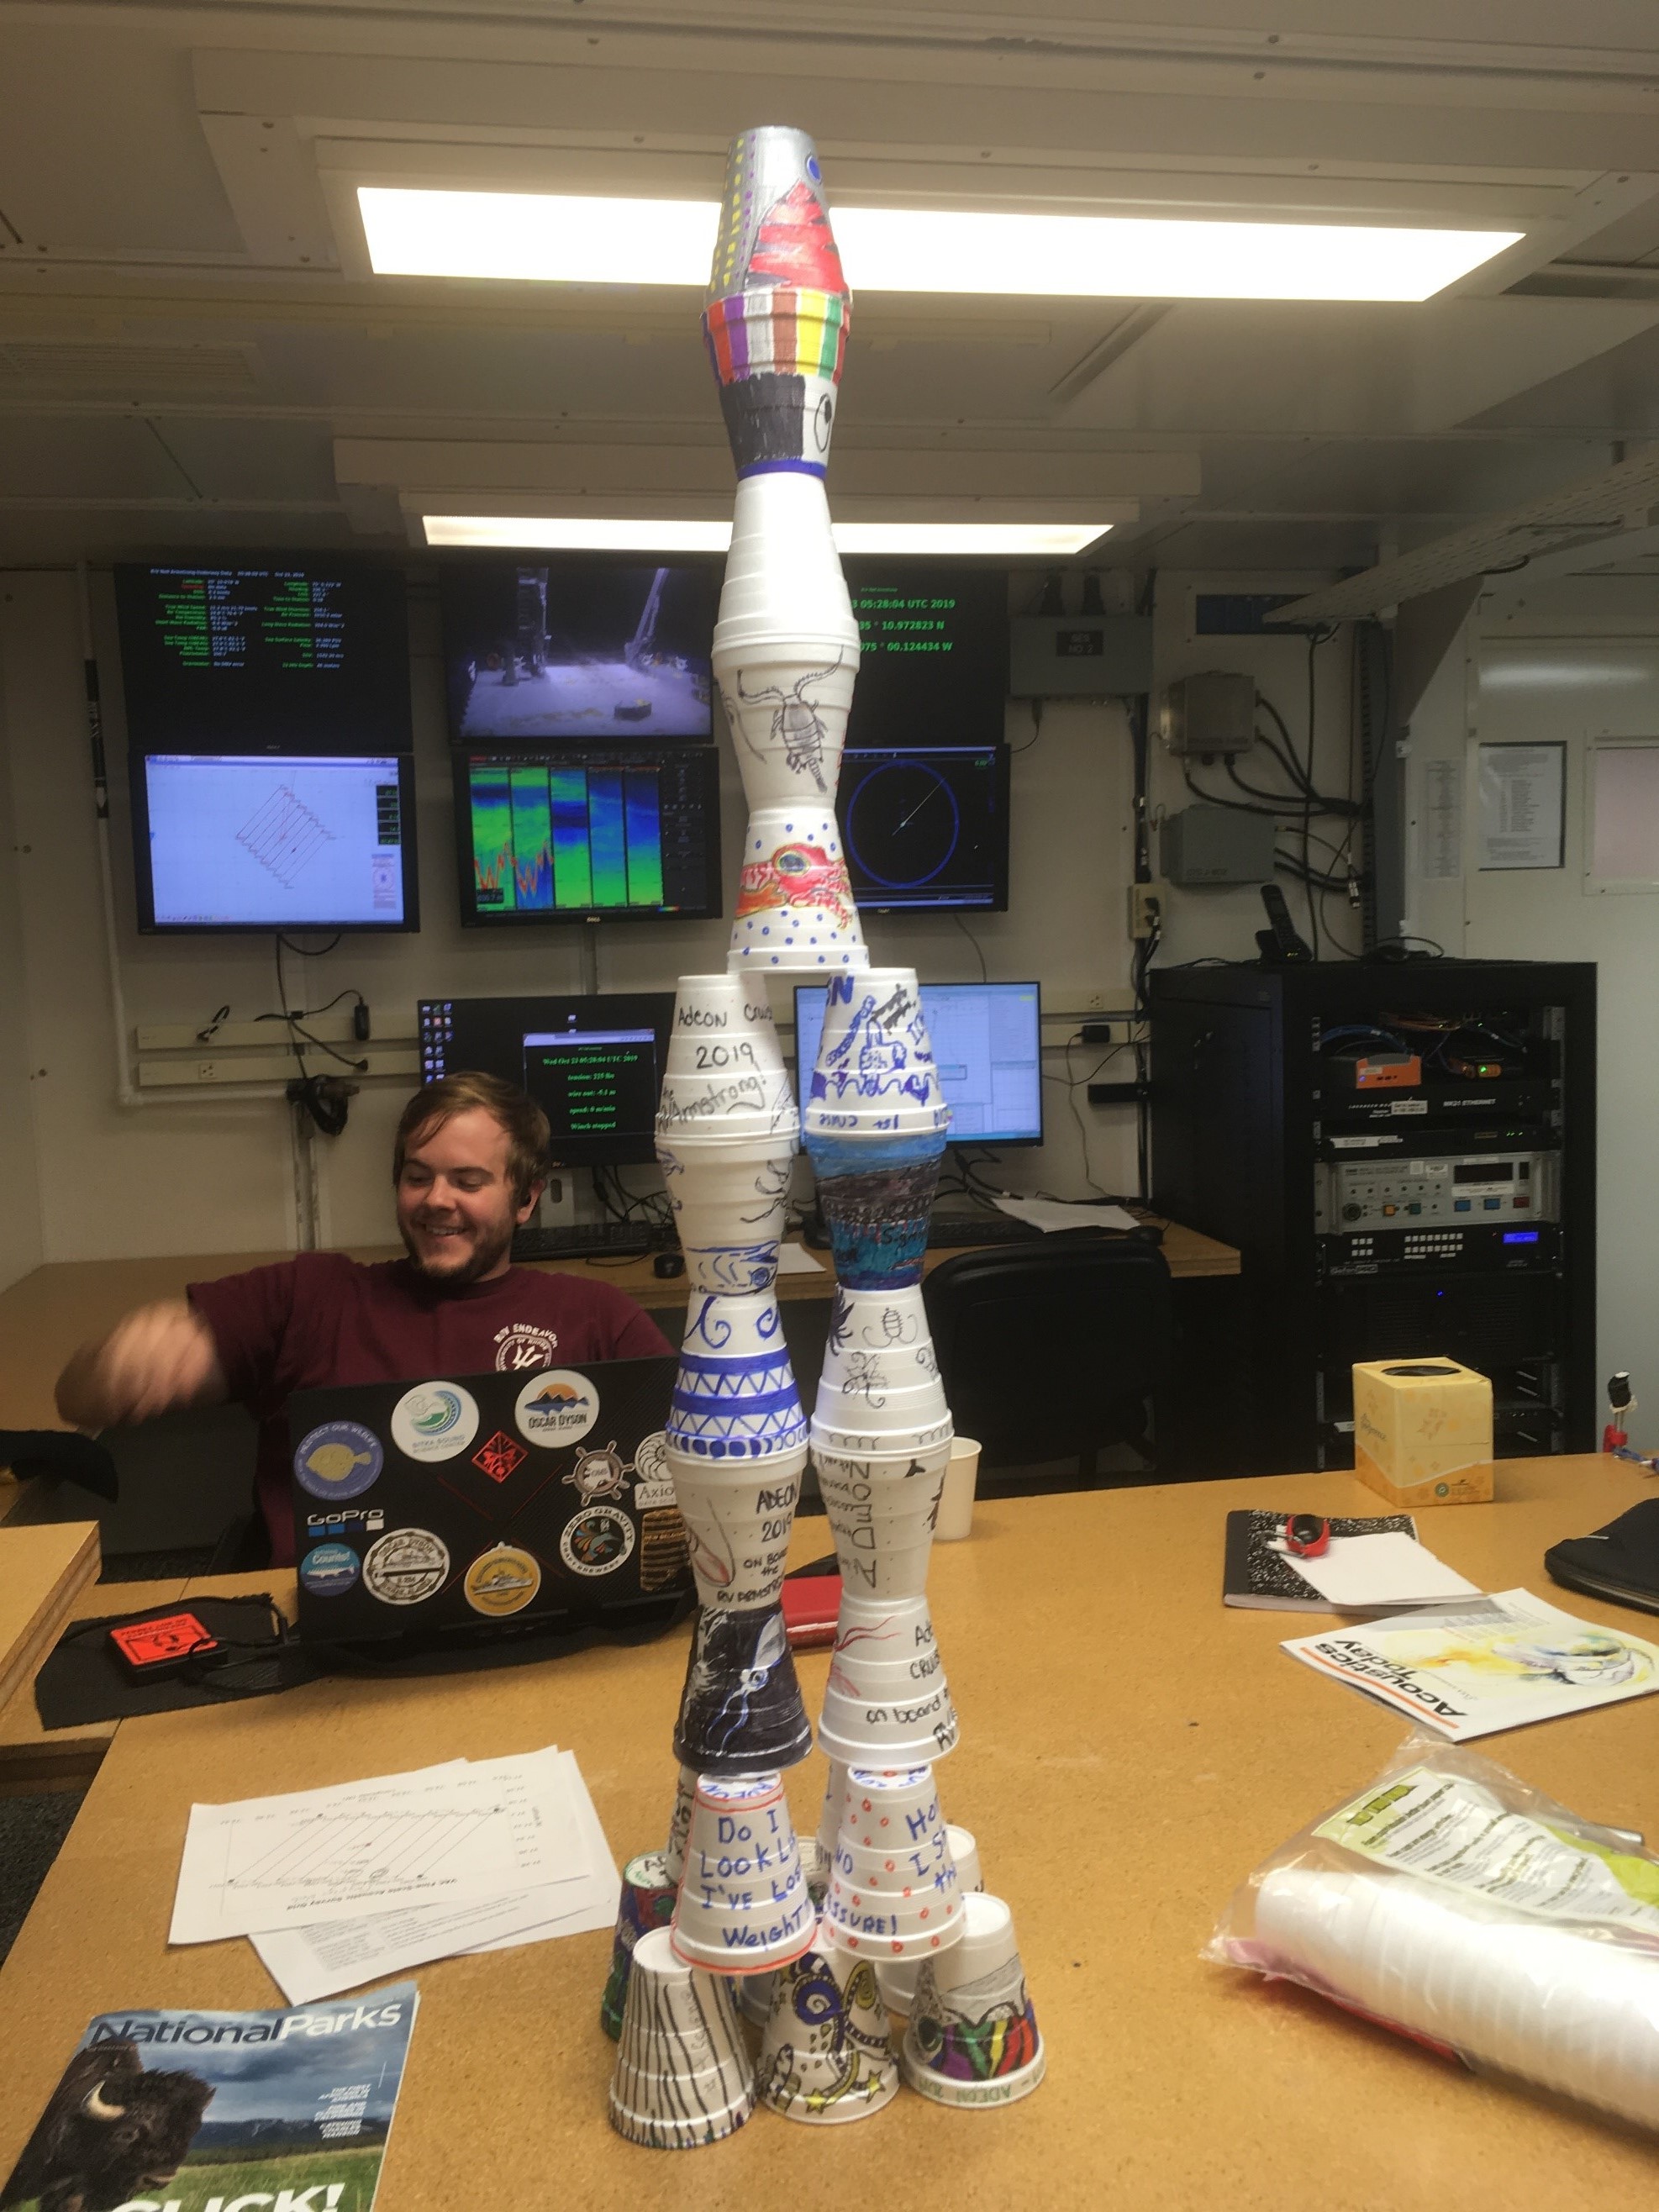 cup tower